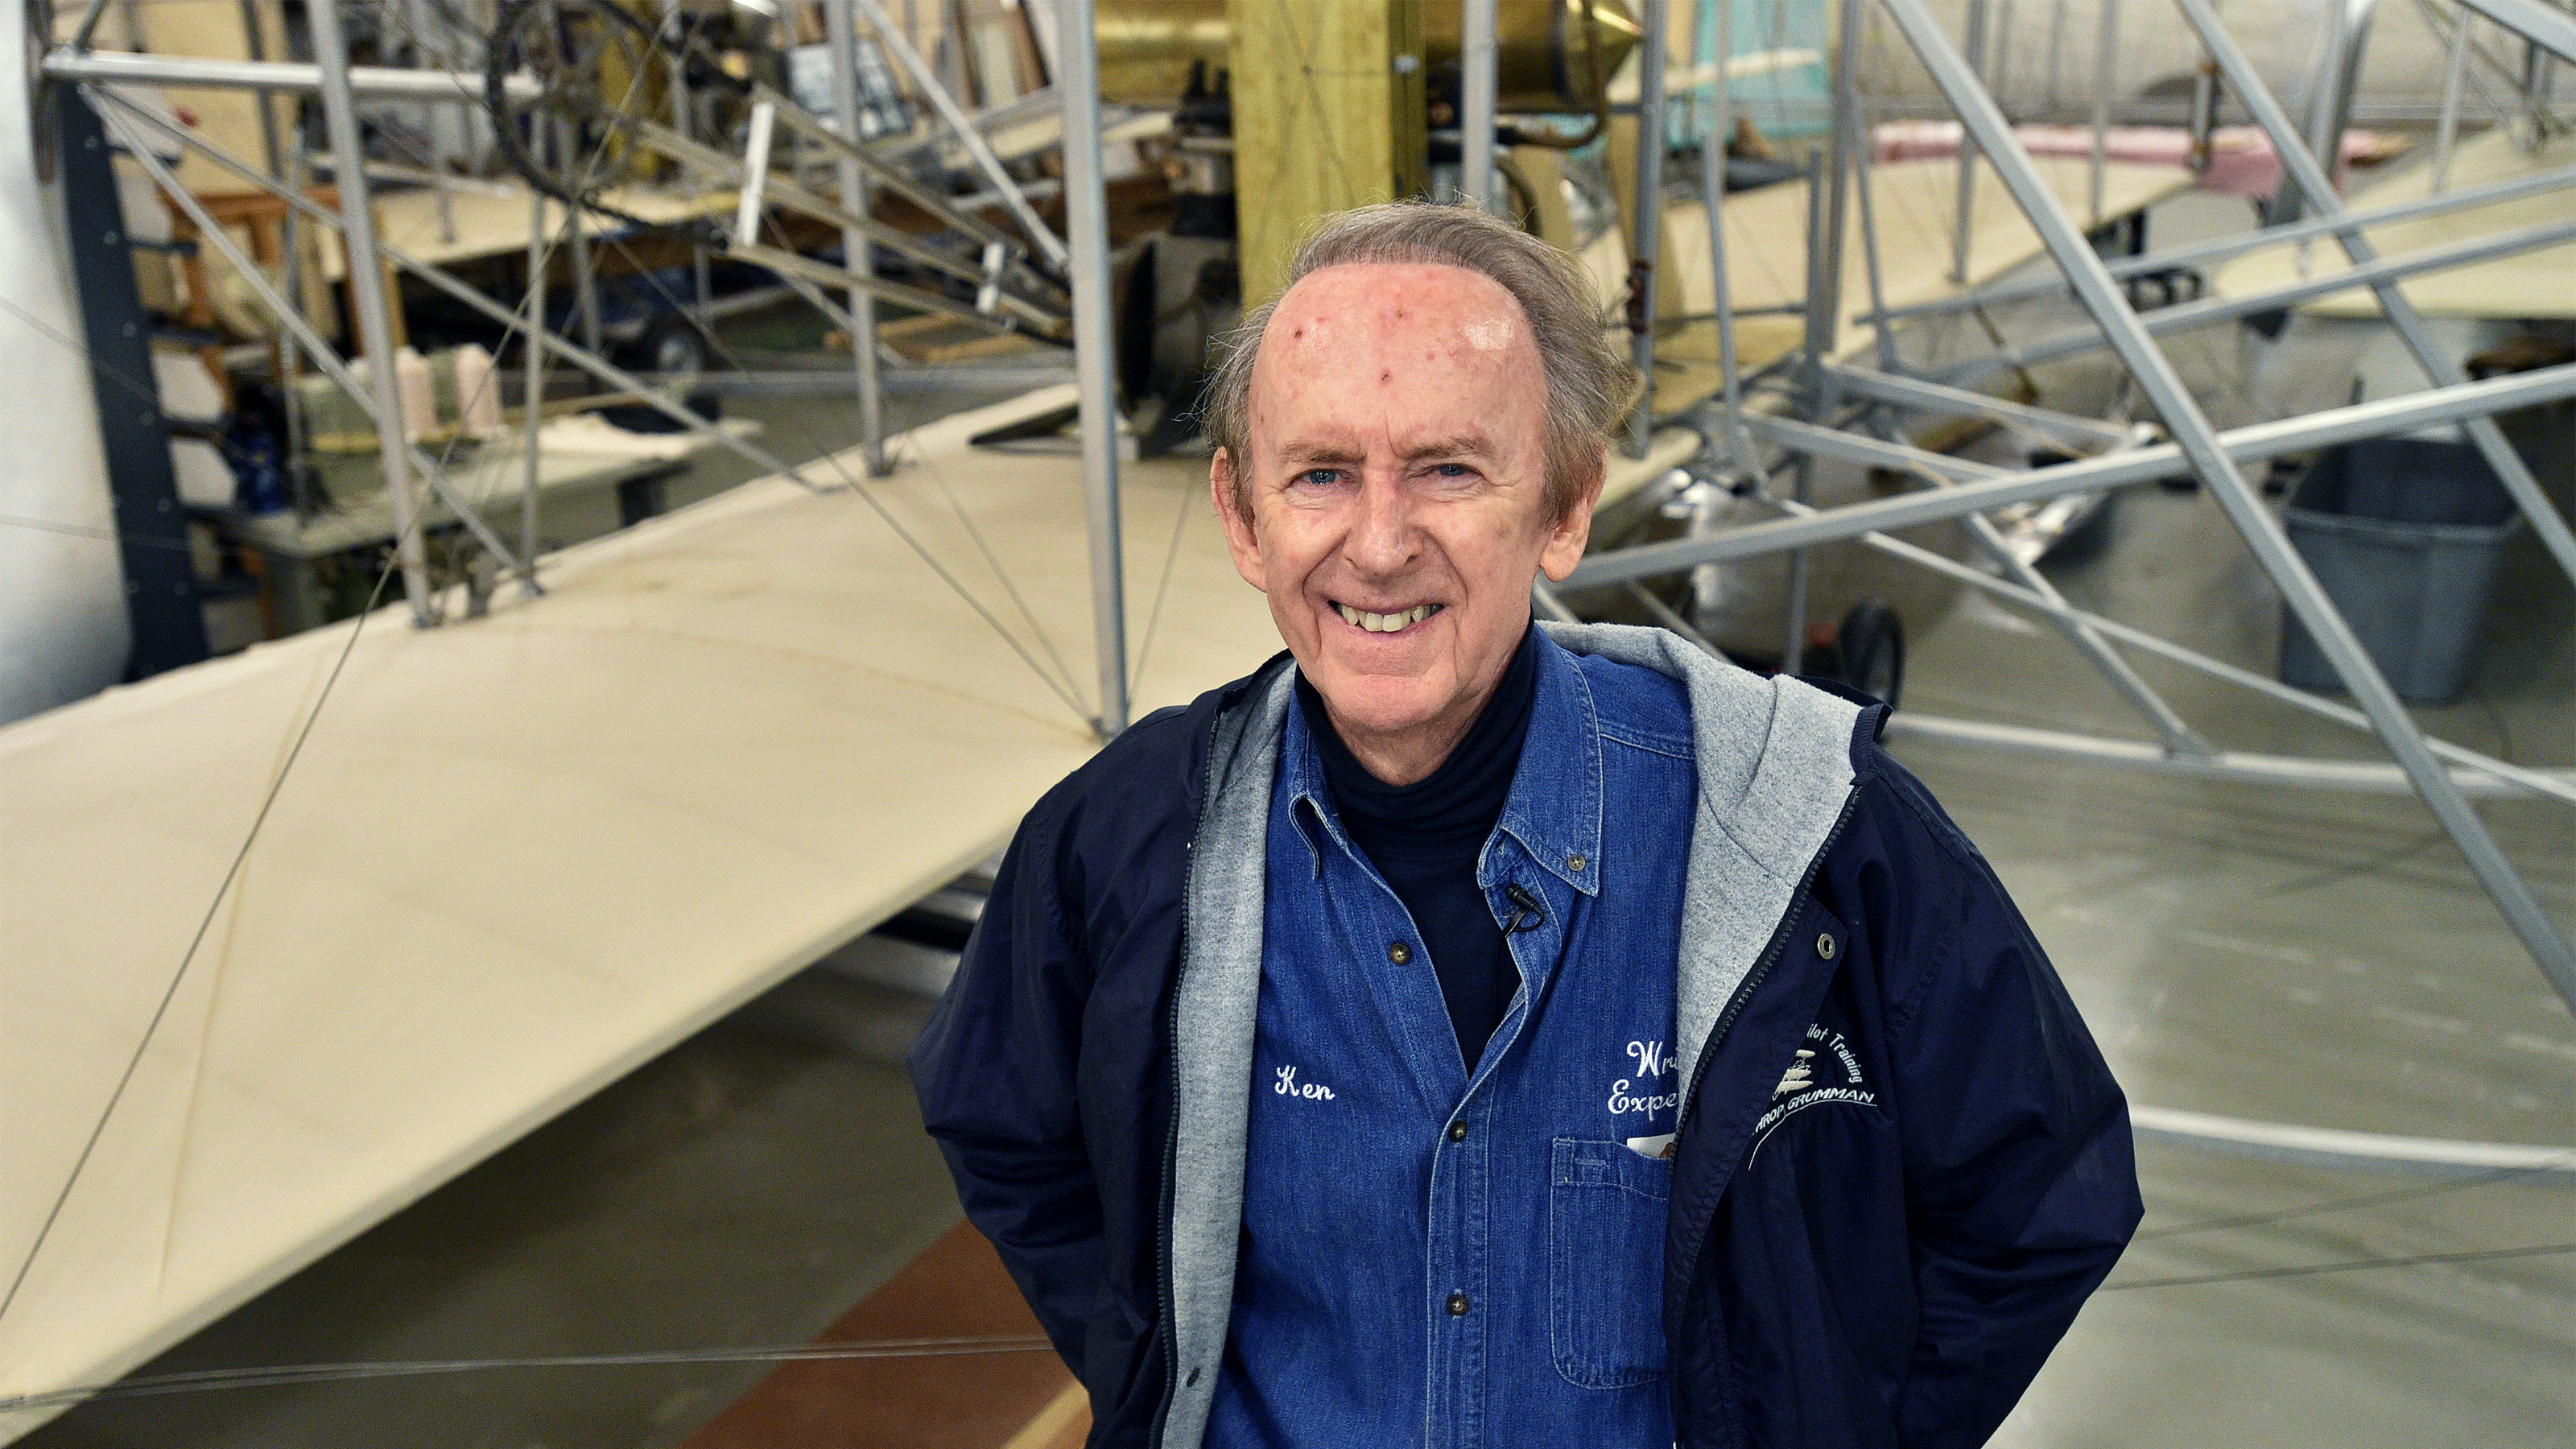 The Wright Experience Museum's Ken Hyde, a retired American Airlines pilot, uses science, technology, engineering, and math concepts to re-create the Wright brothers' aircraft designs in Warrenton, Virginia. Photo by David Tulis.